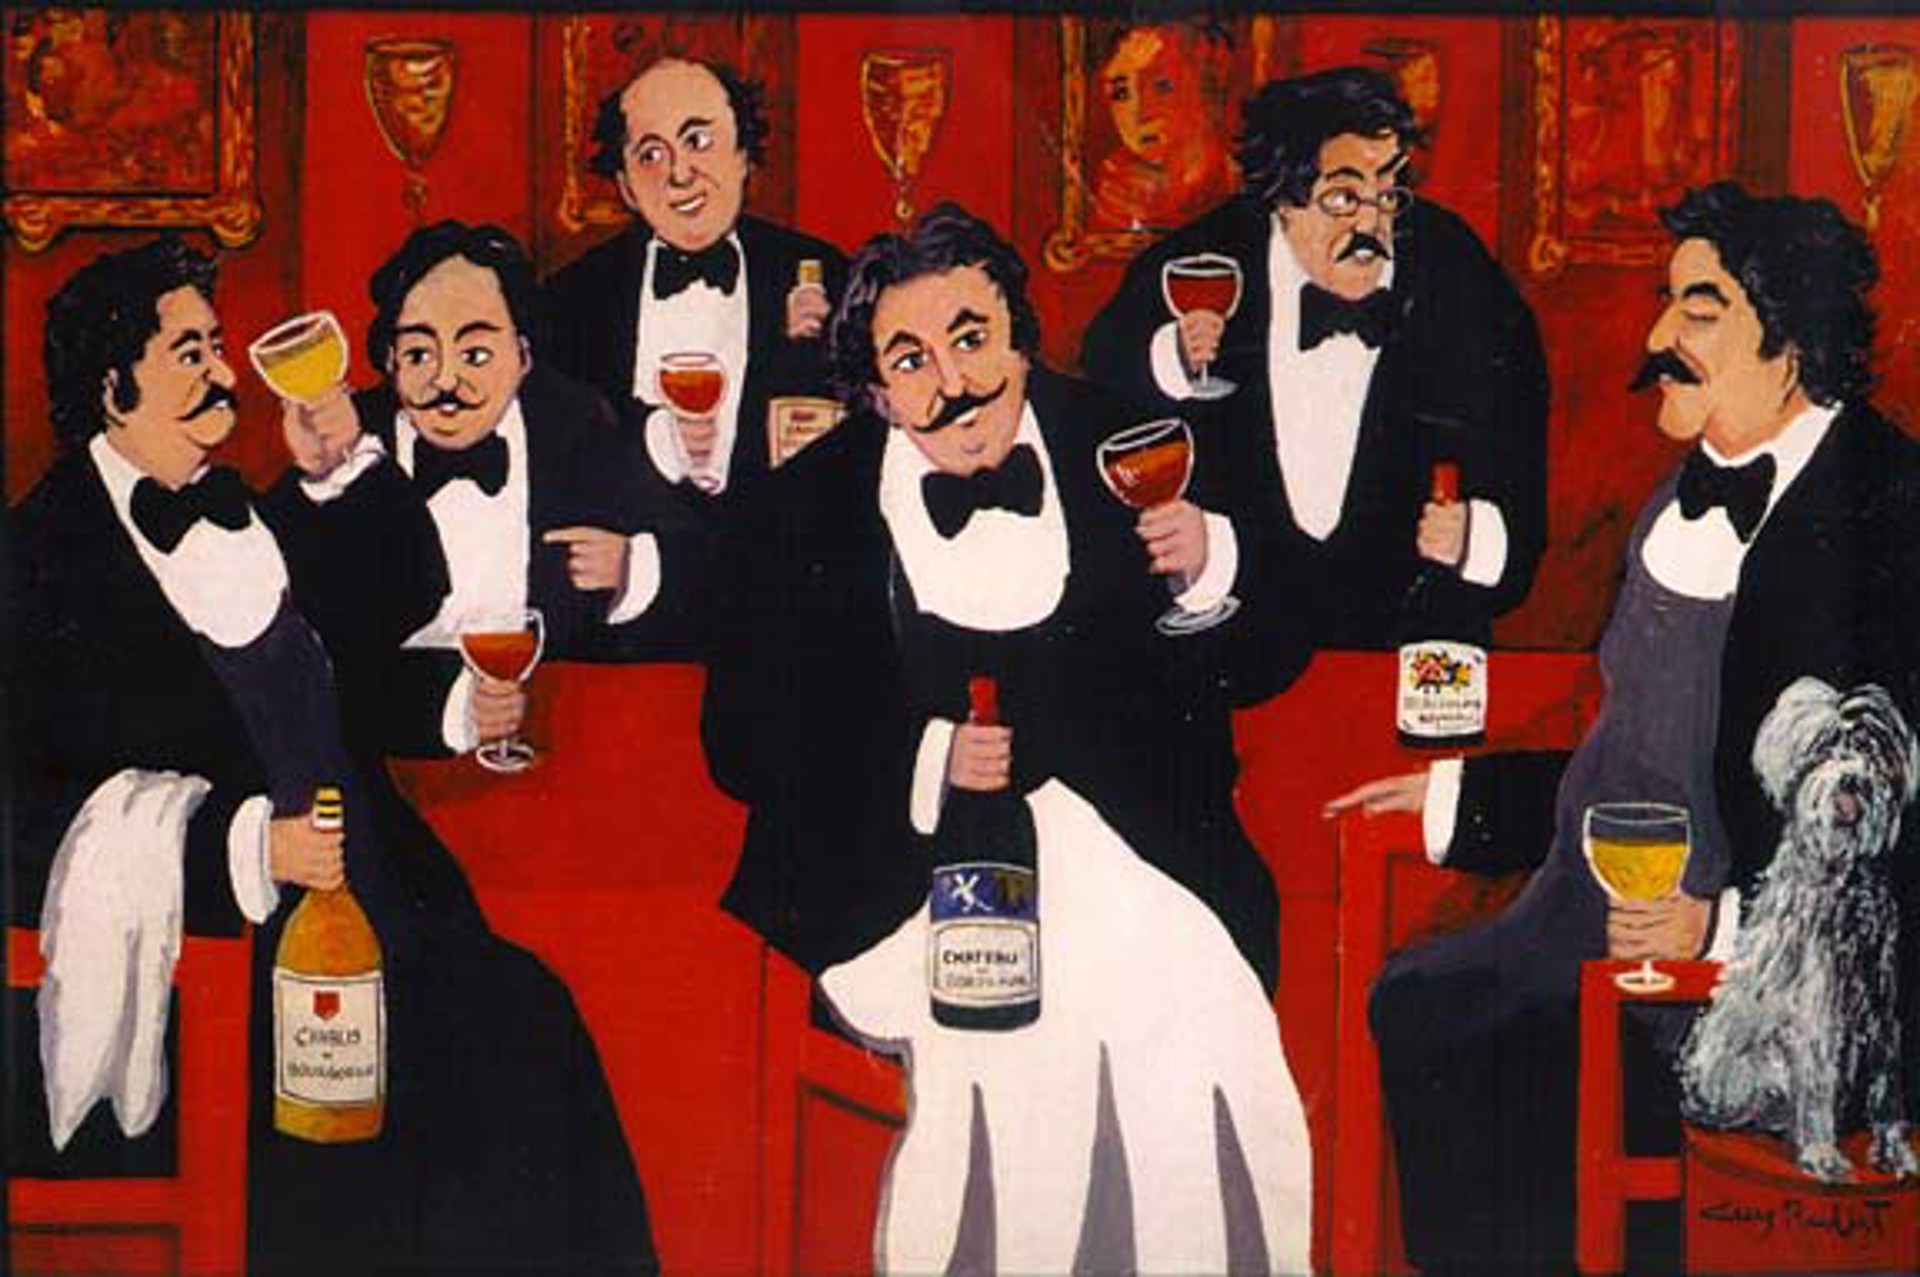 A Gathering Of Connoisseurs by Guy Buffet